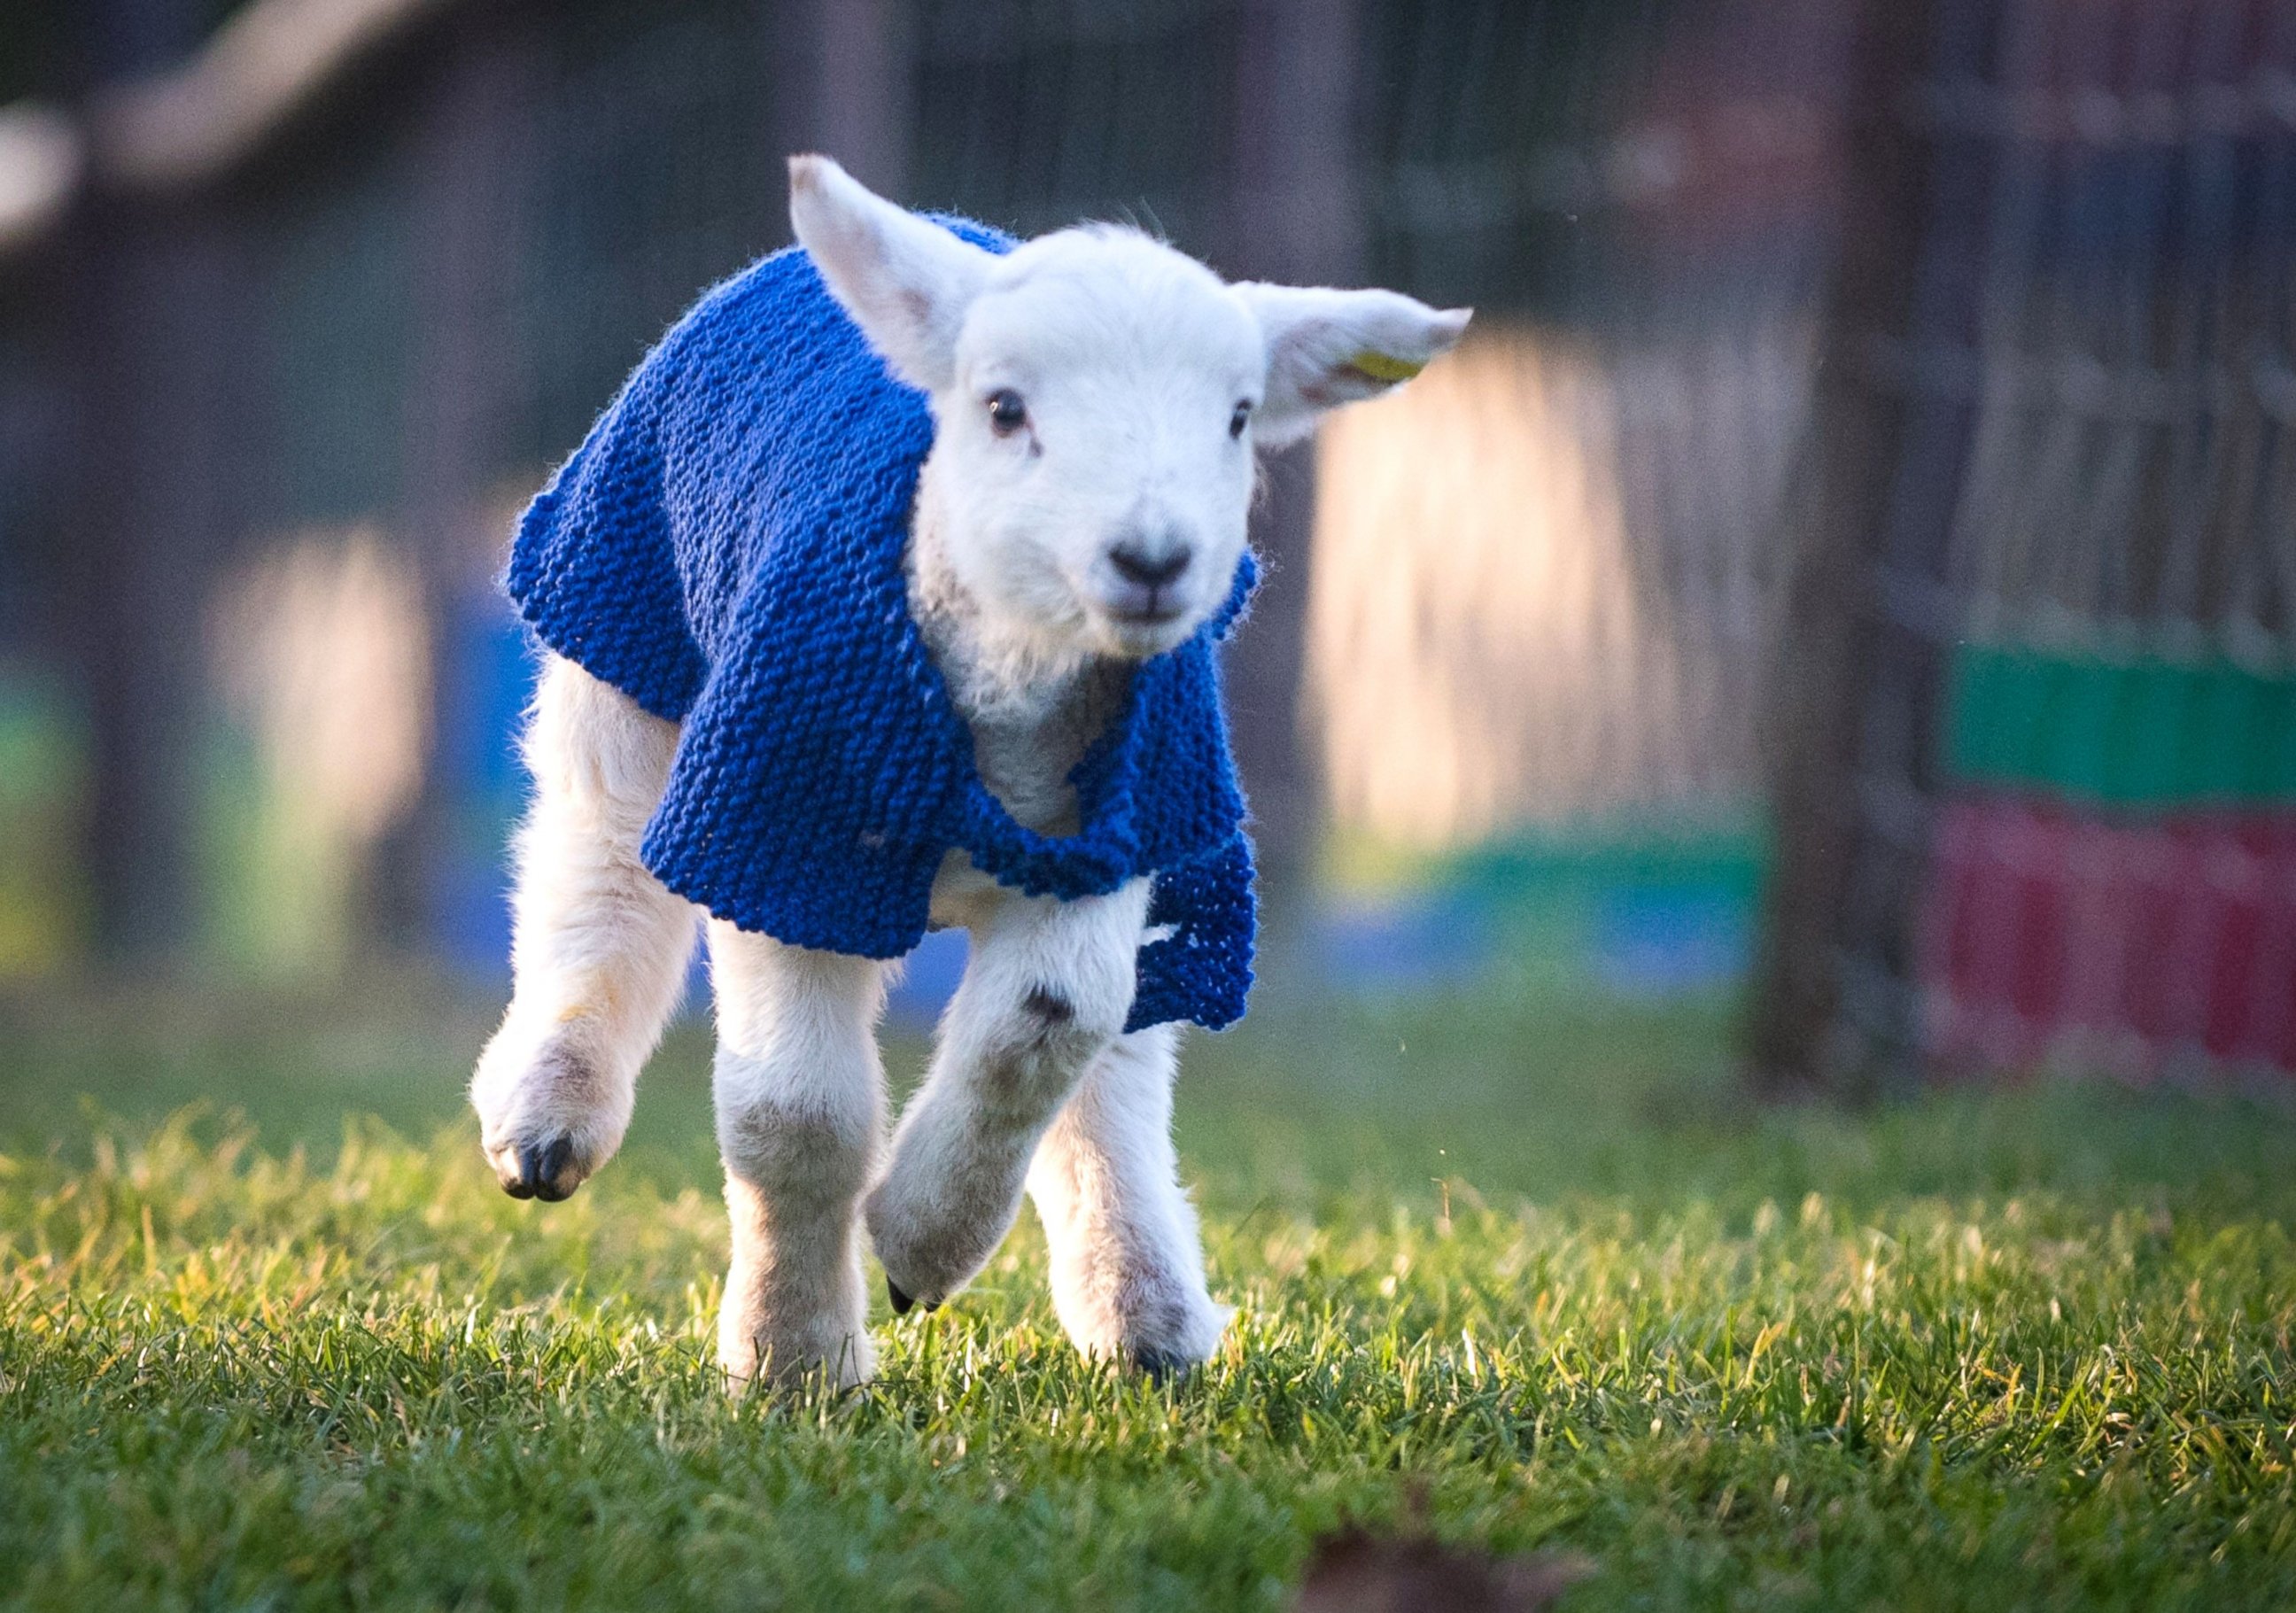 PHOTO:A group of anonymous knitters have donated wool sweaters to help keep a group of newborn lambs snug and warm at Avon Valley Adventure and Wildlife Park, in Somerset, Britain, March 20, 2016.